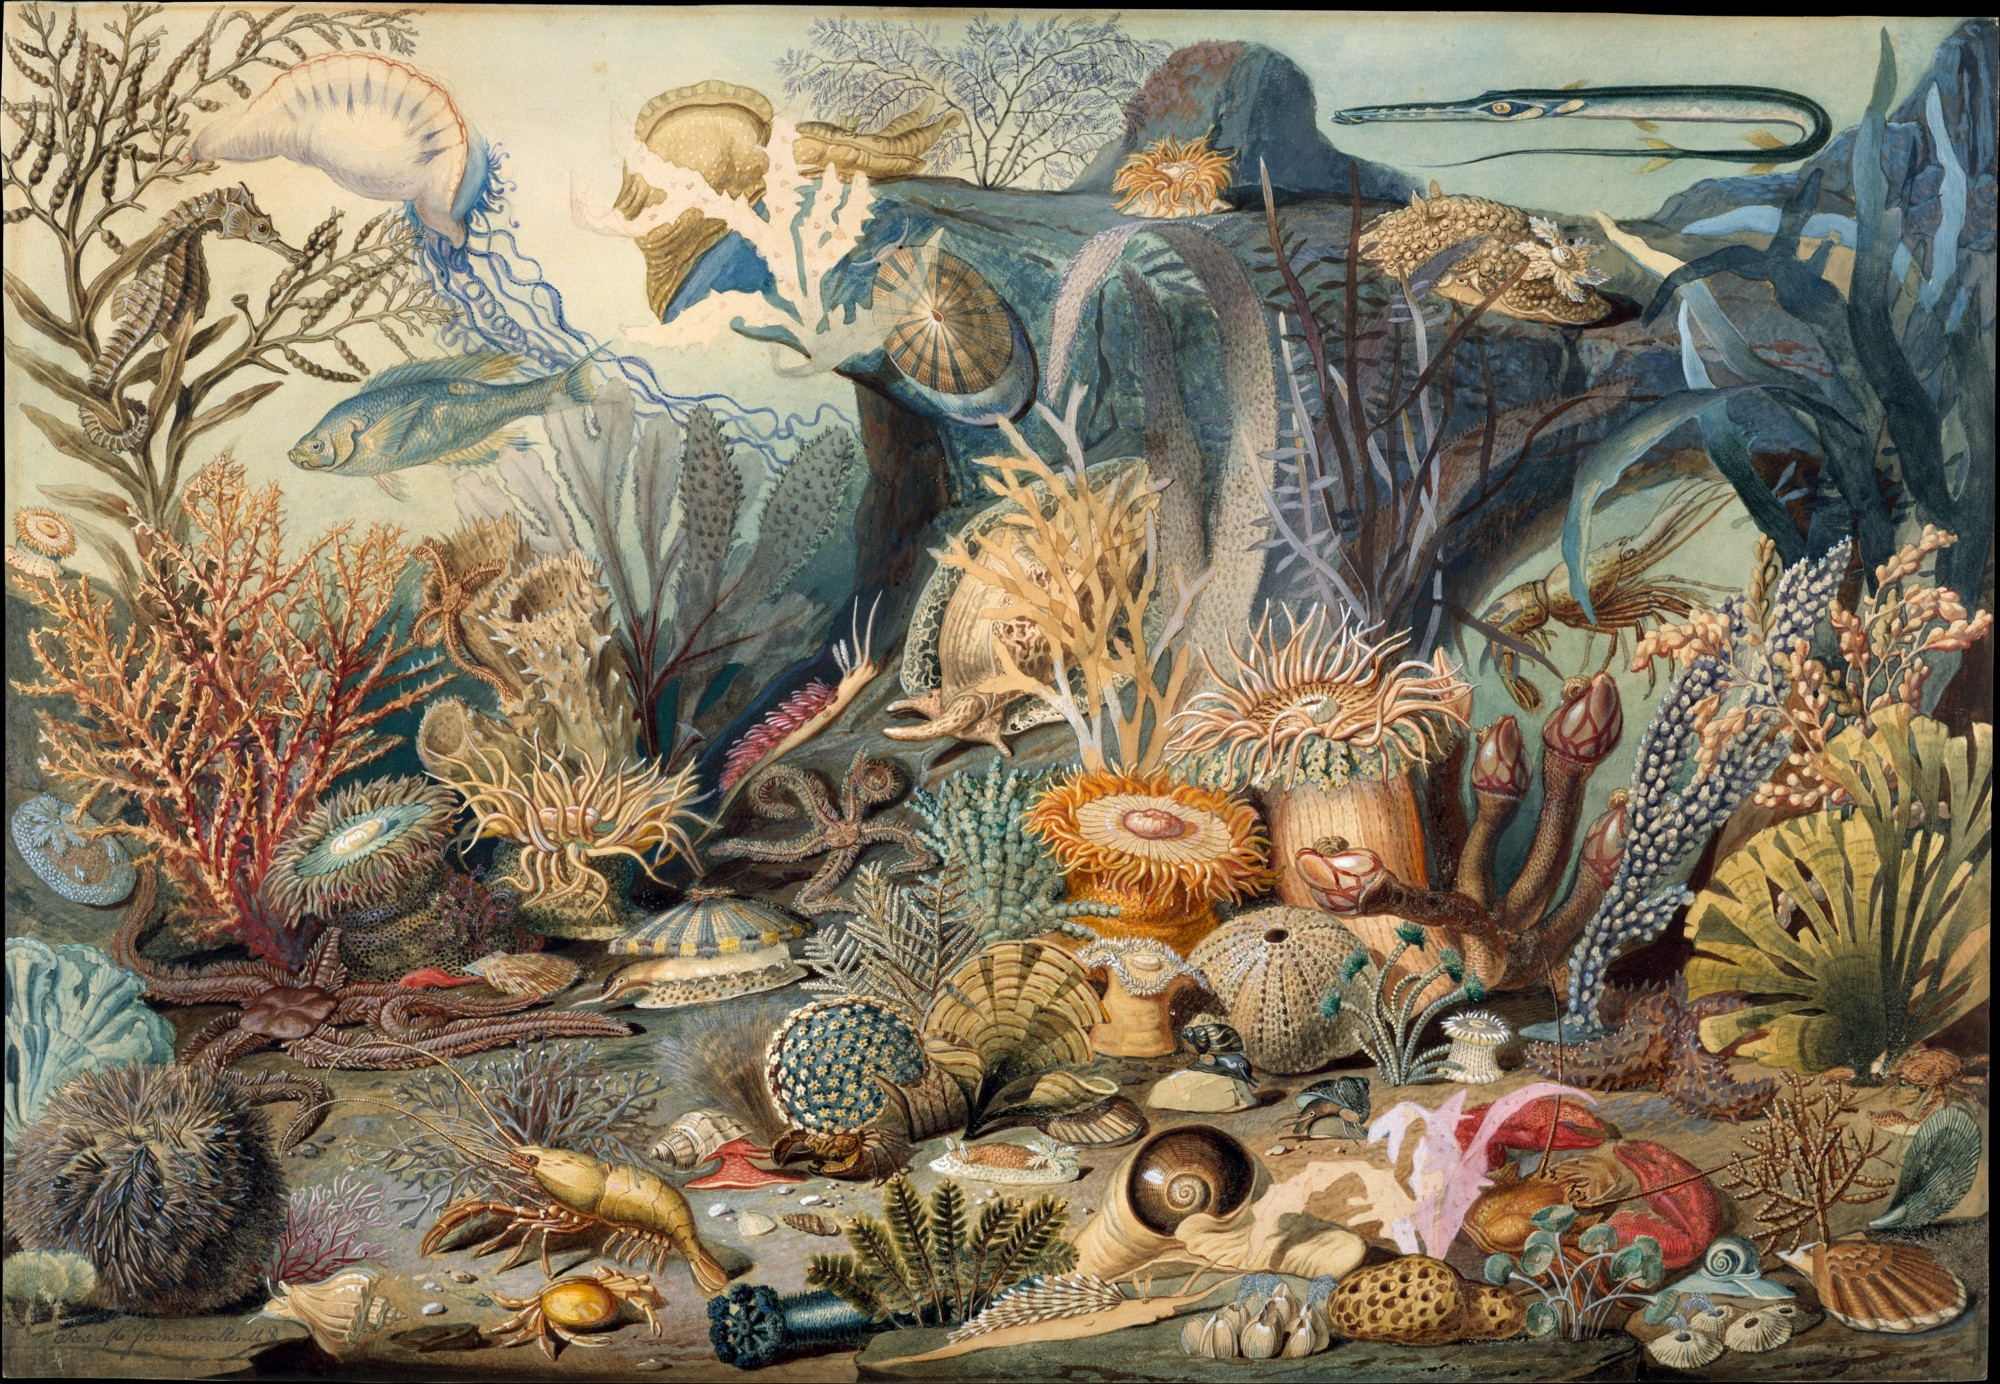 Christian Schussele, “Ocean Life”, an illustrated imagining of the Cambrian Explosion, date unknown. Gift of Mr and Mrs Erving Wolf, in memory of Diane R. Wolf, 1977, Wikipedia.org, public domain dedication.[1]